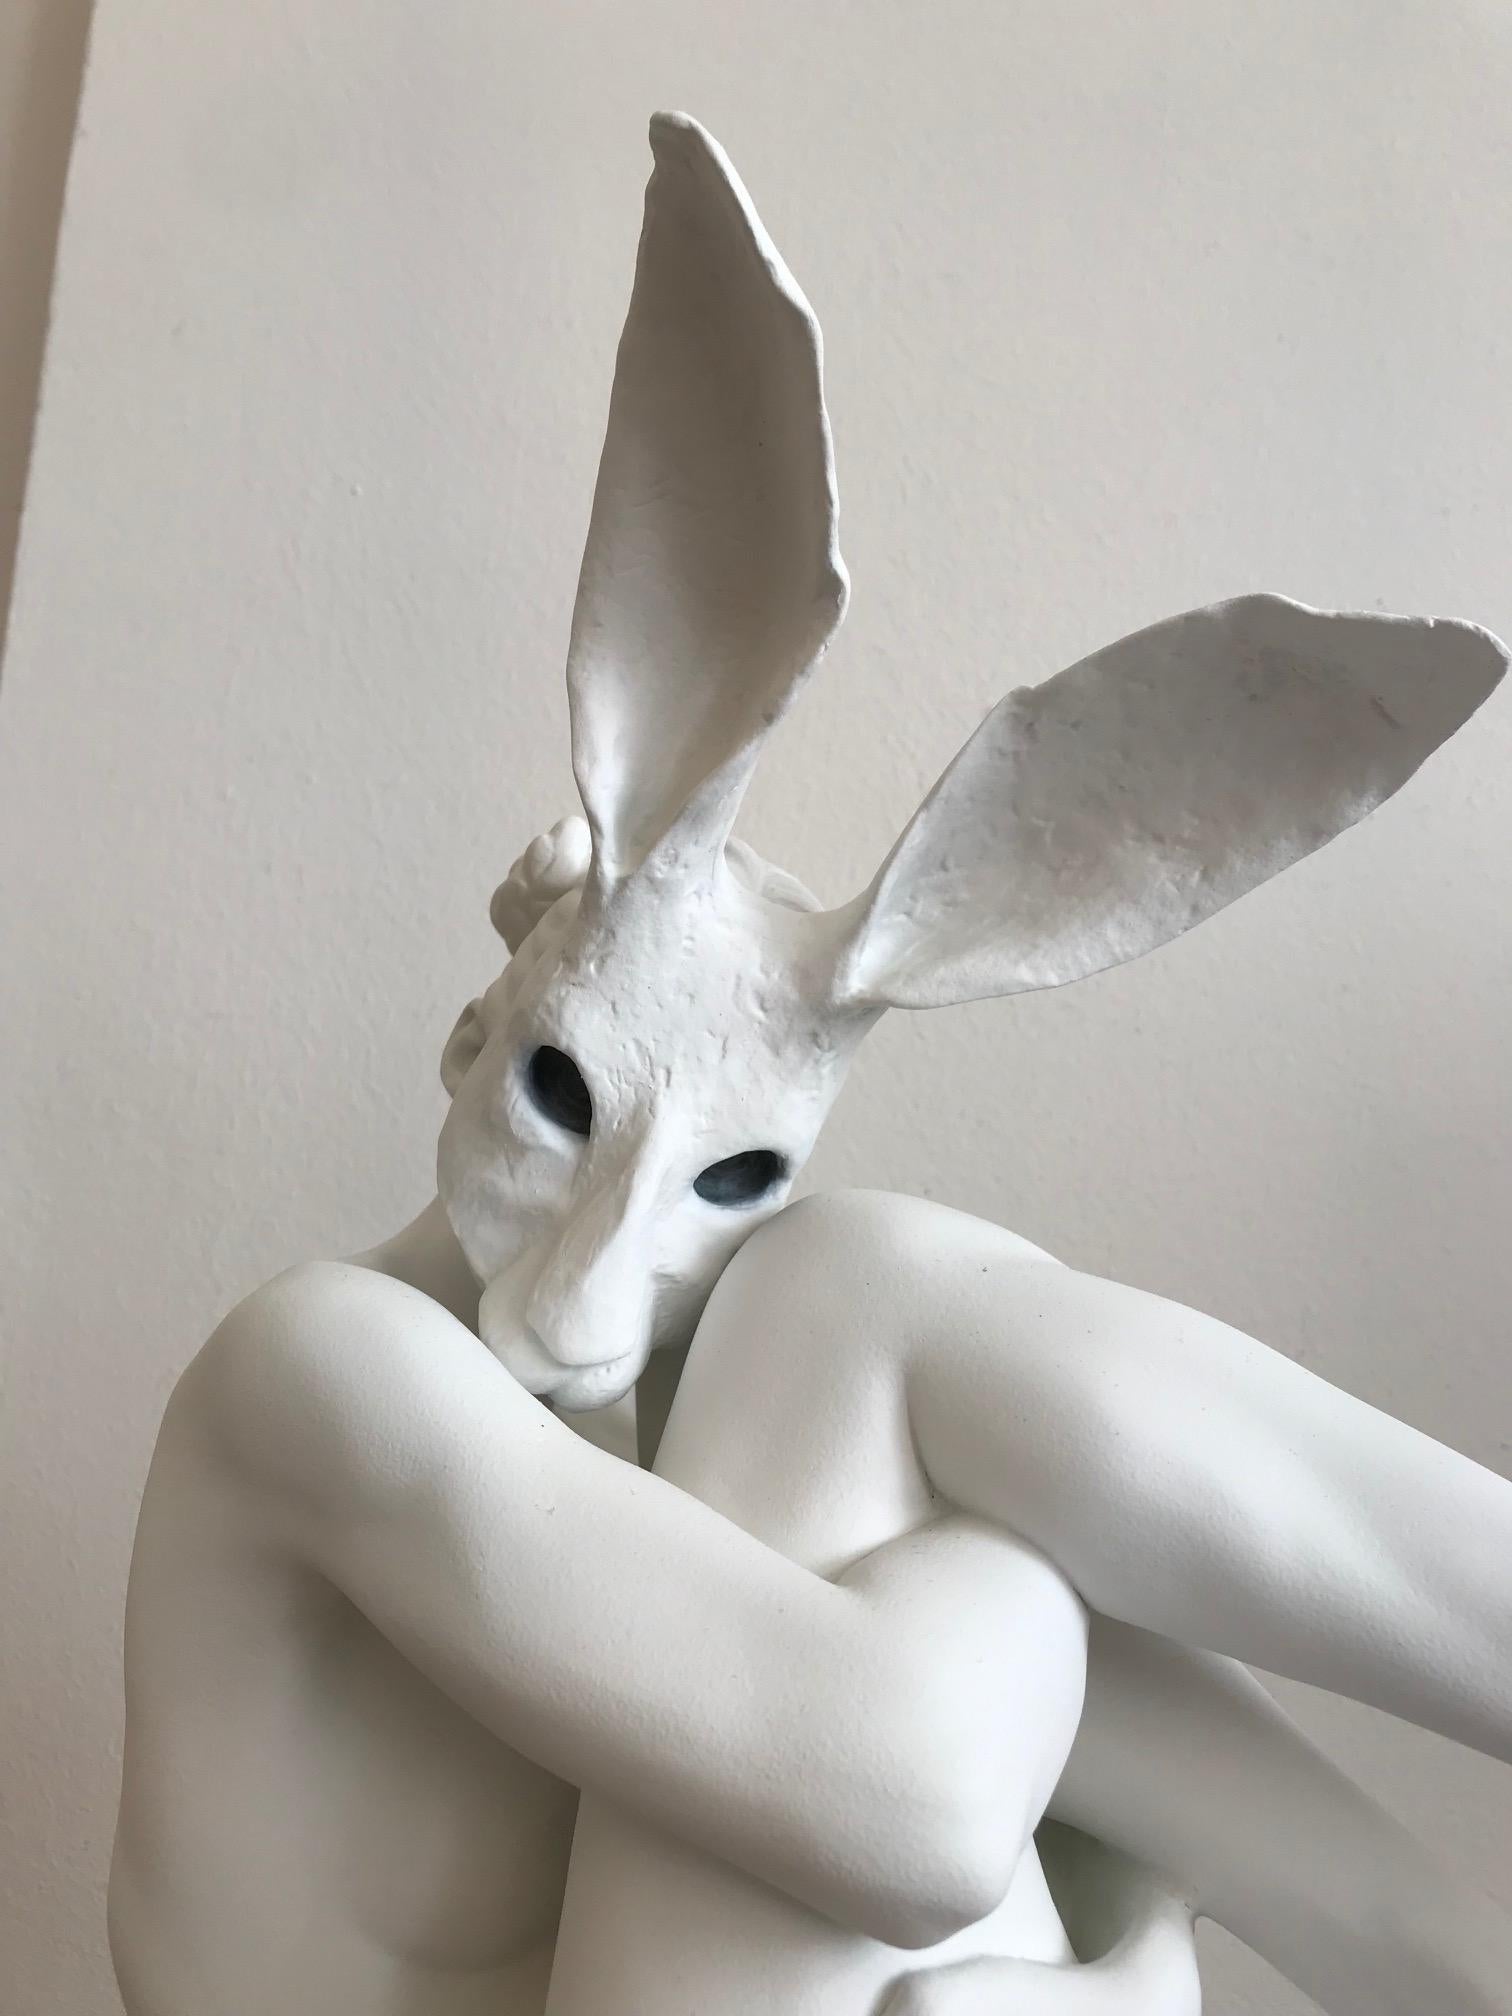 The mysterious artworks by the British artist Rachel Ann Stevenson invite you into a dream world. Rachel Ann sees artists as day dreamers who can show the impossible to the world. Her sculptures resemble human beings, but at the same time they are